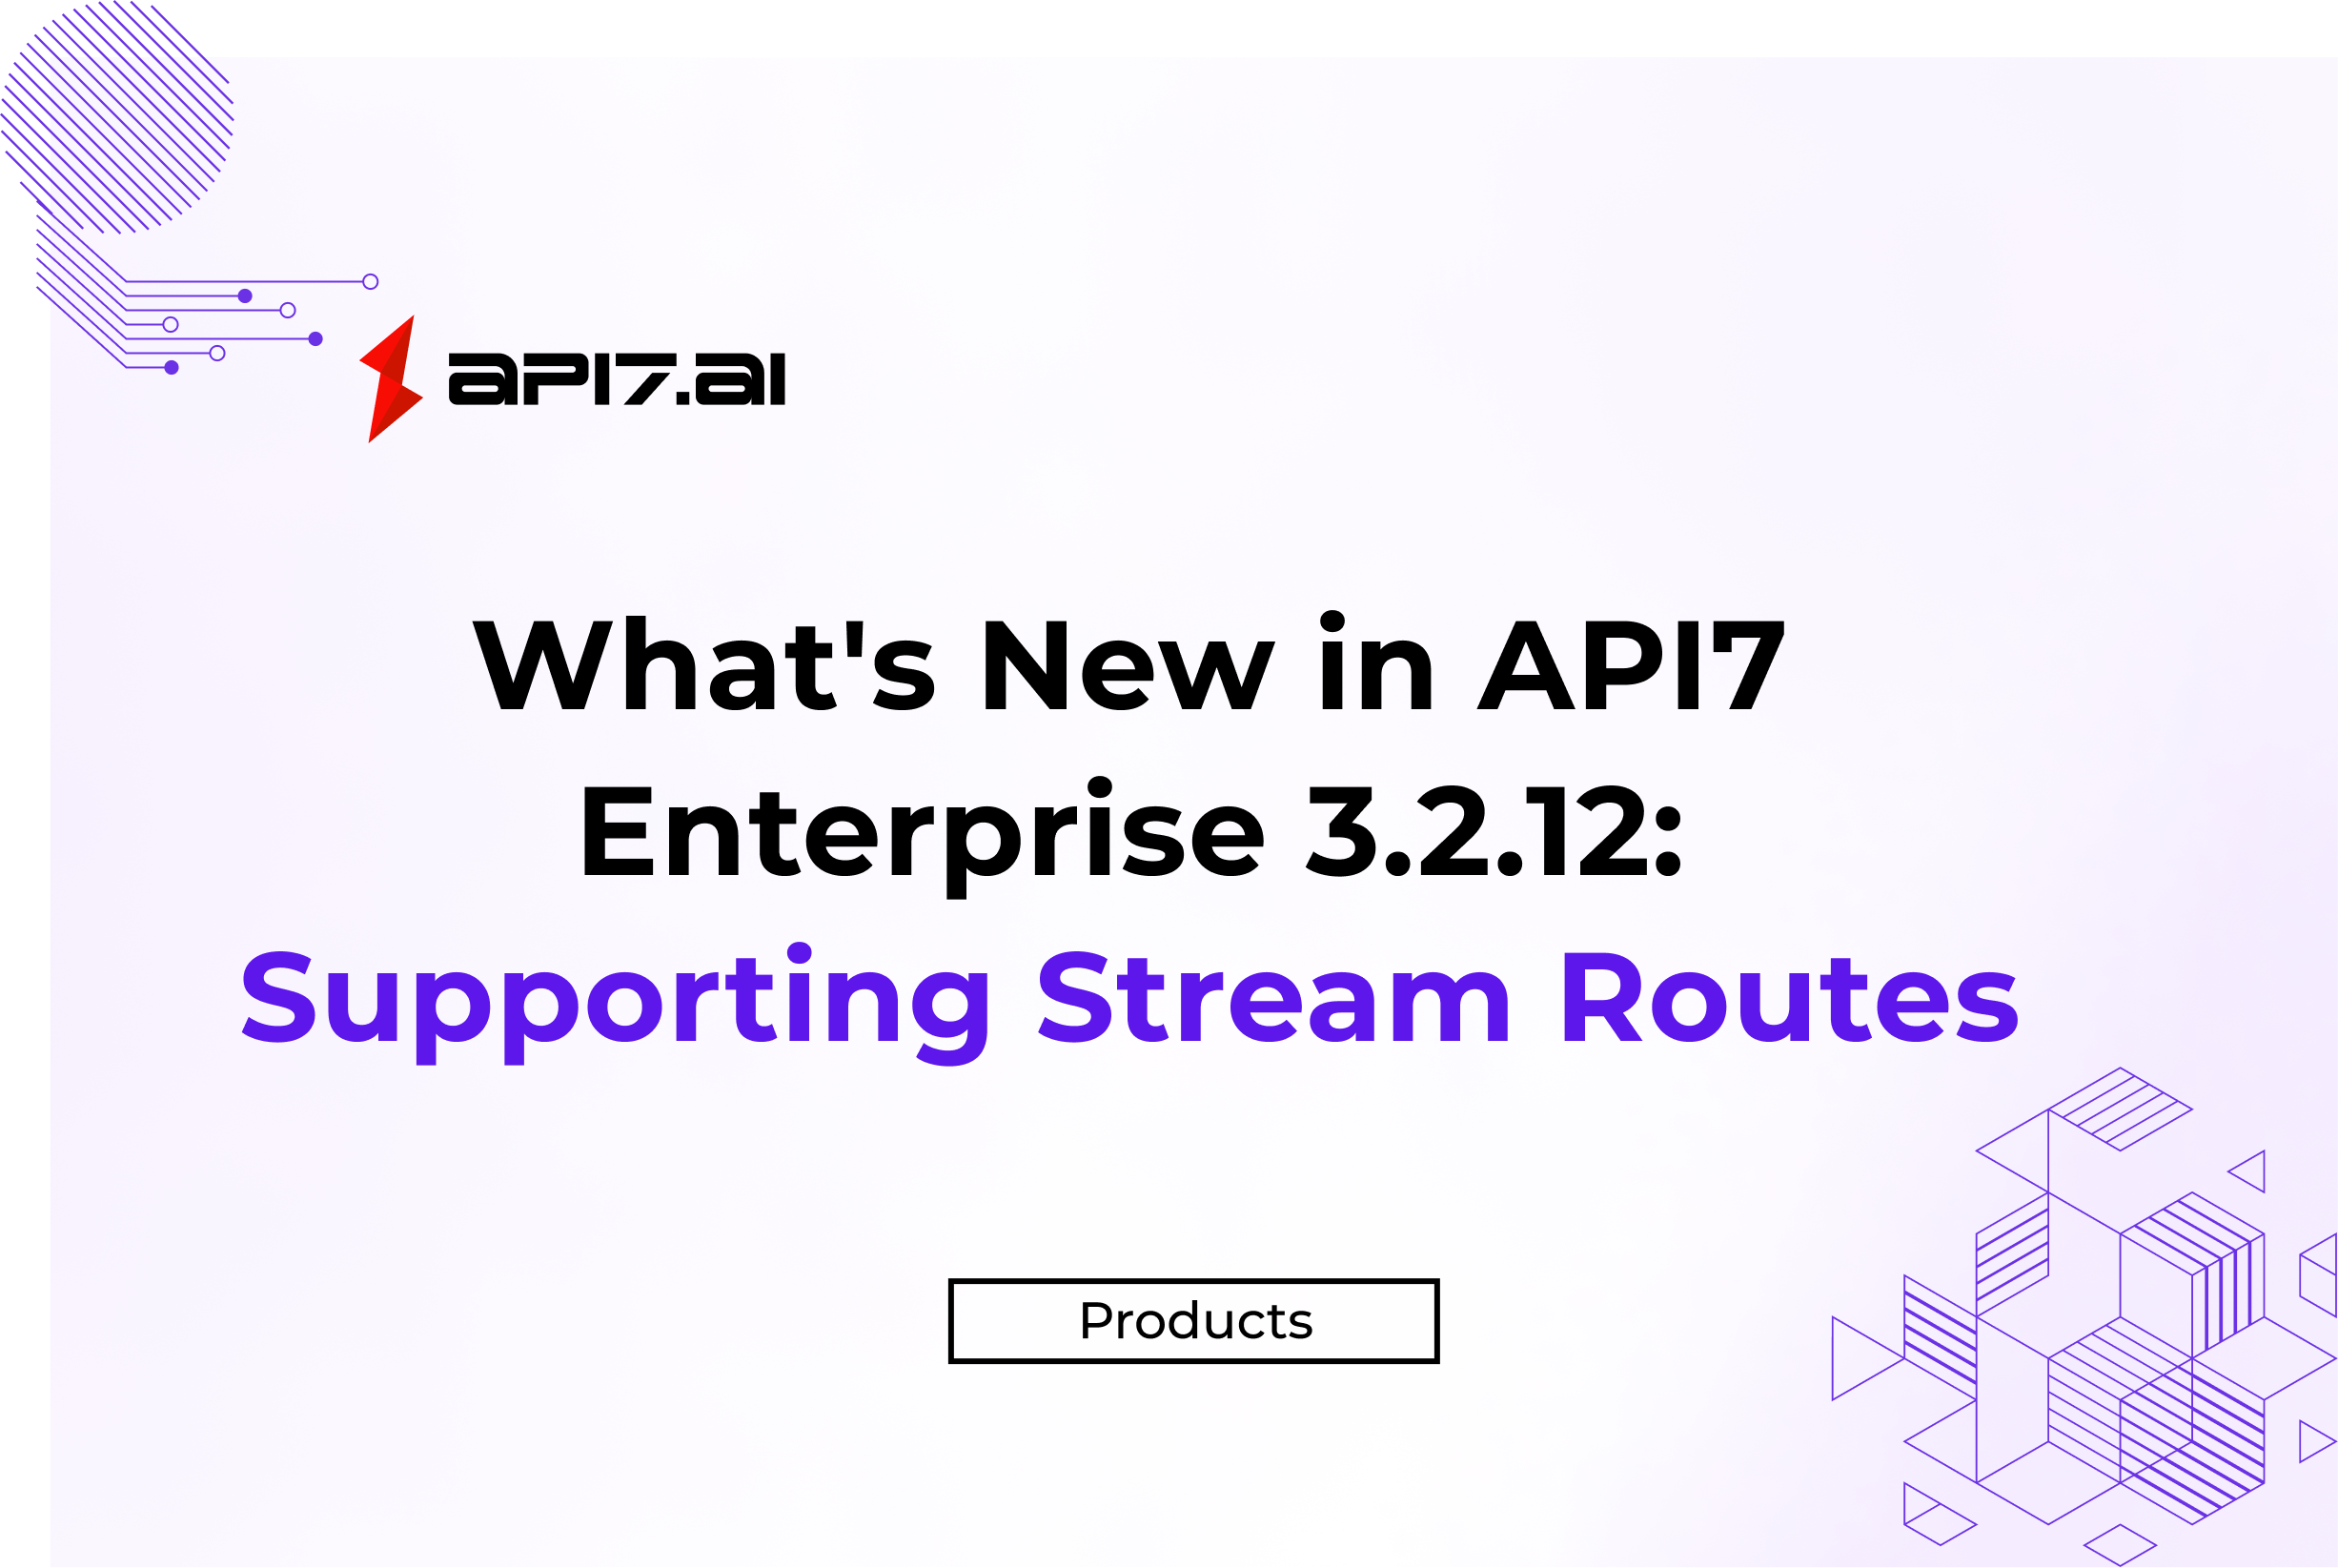 What's New in API7 Enterprise 3.2.12: Supporting Stream Routes